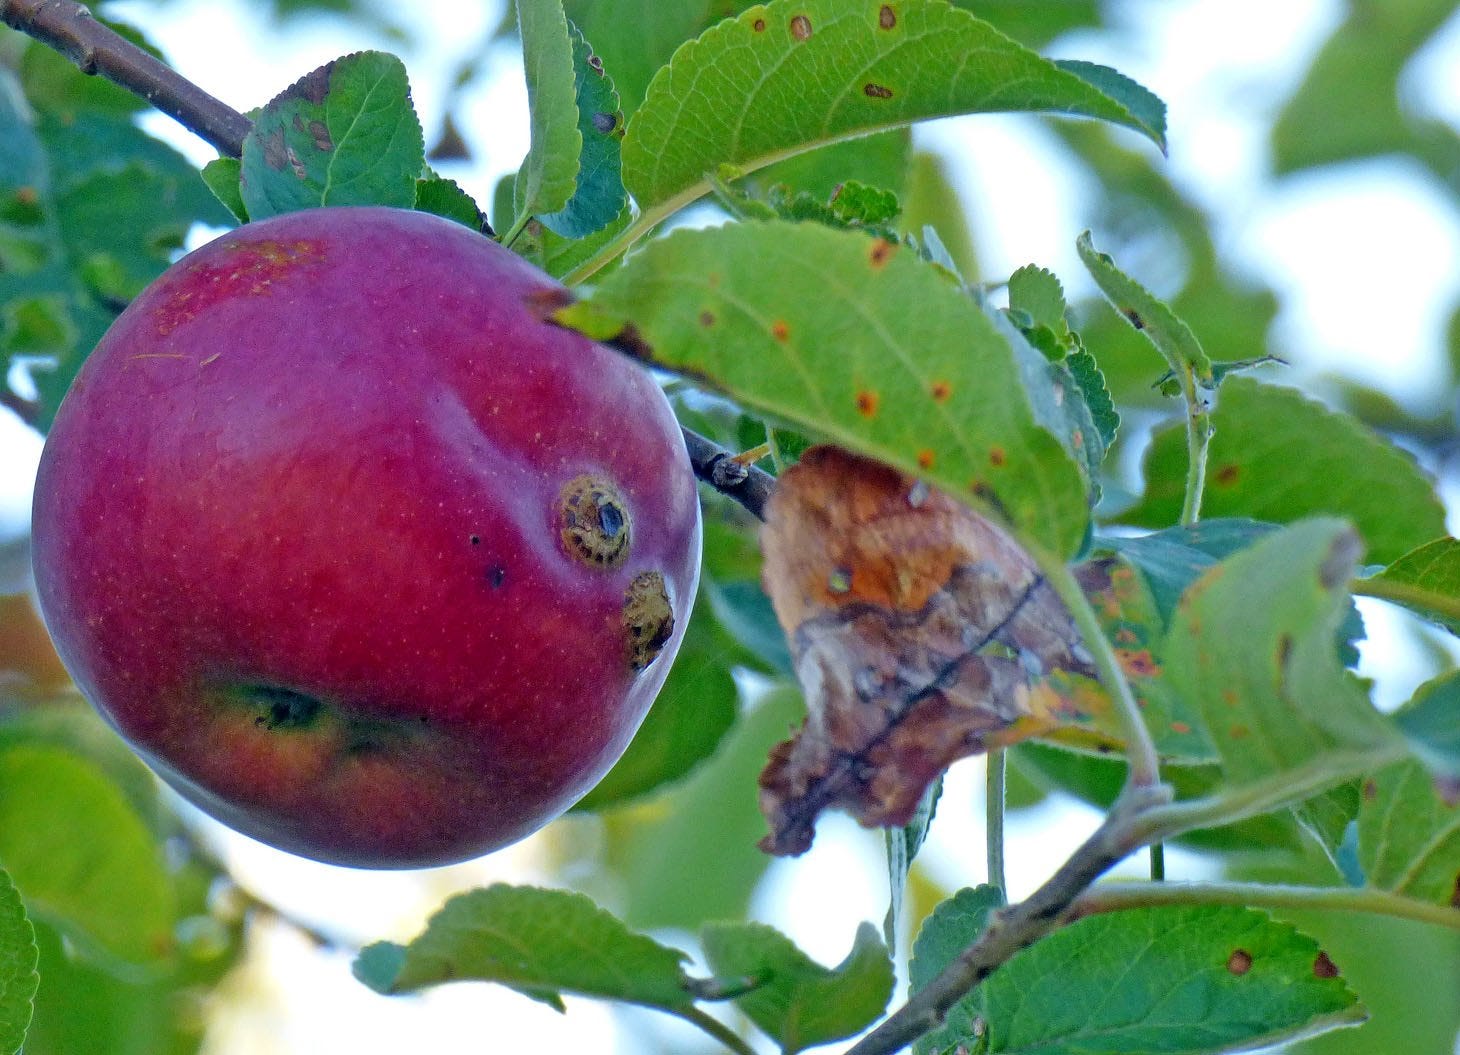 Apple trees are not native to North America